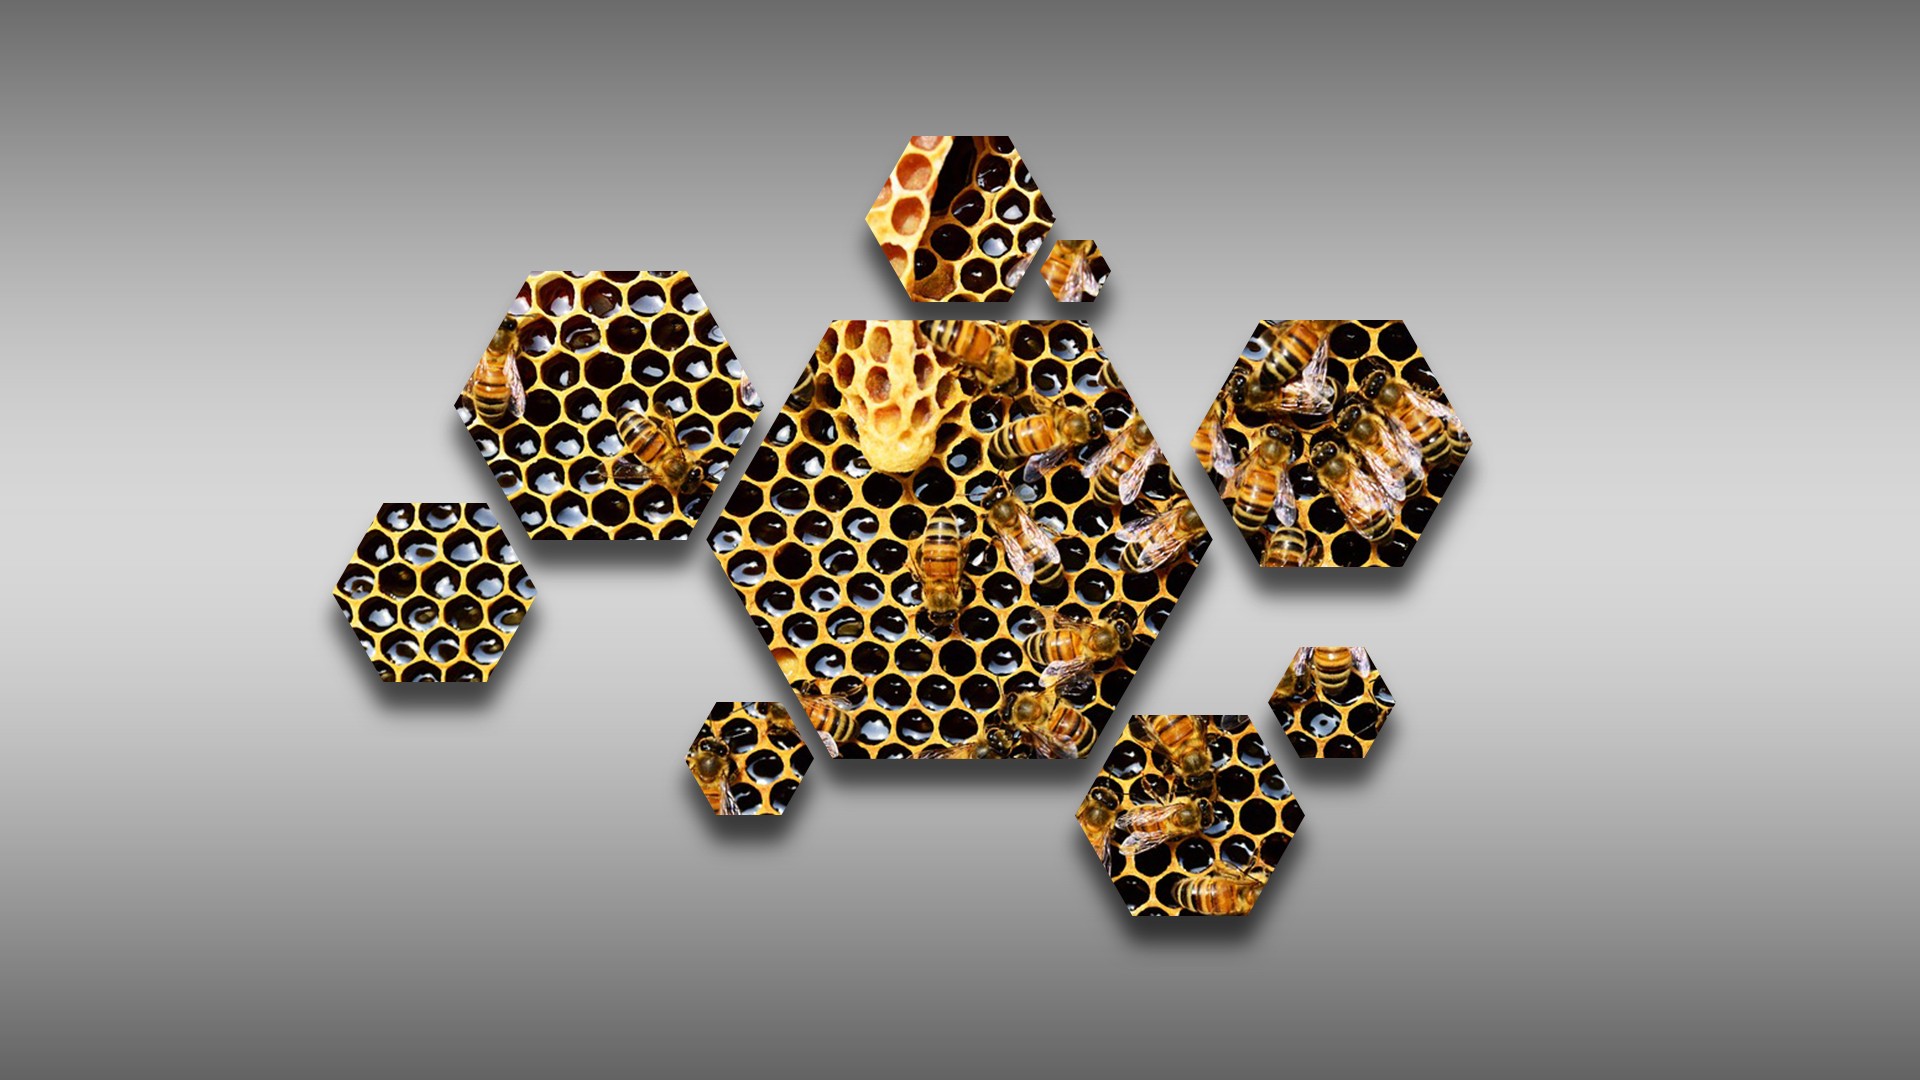 General 1920x1080 hexagon bees hive honeycombs honey beehive patterns digital art animals insect gradient simple background